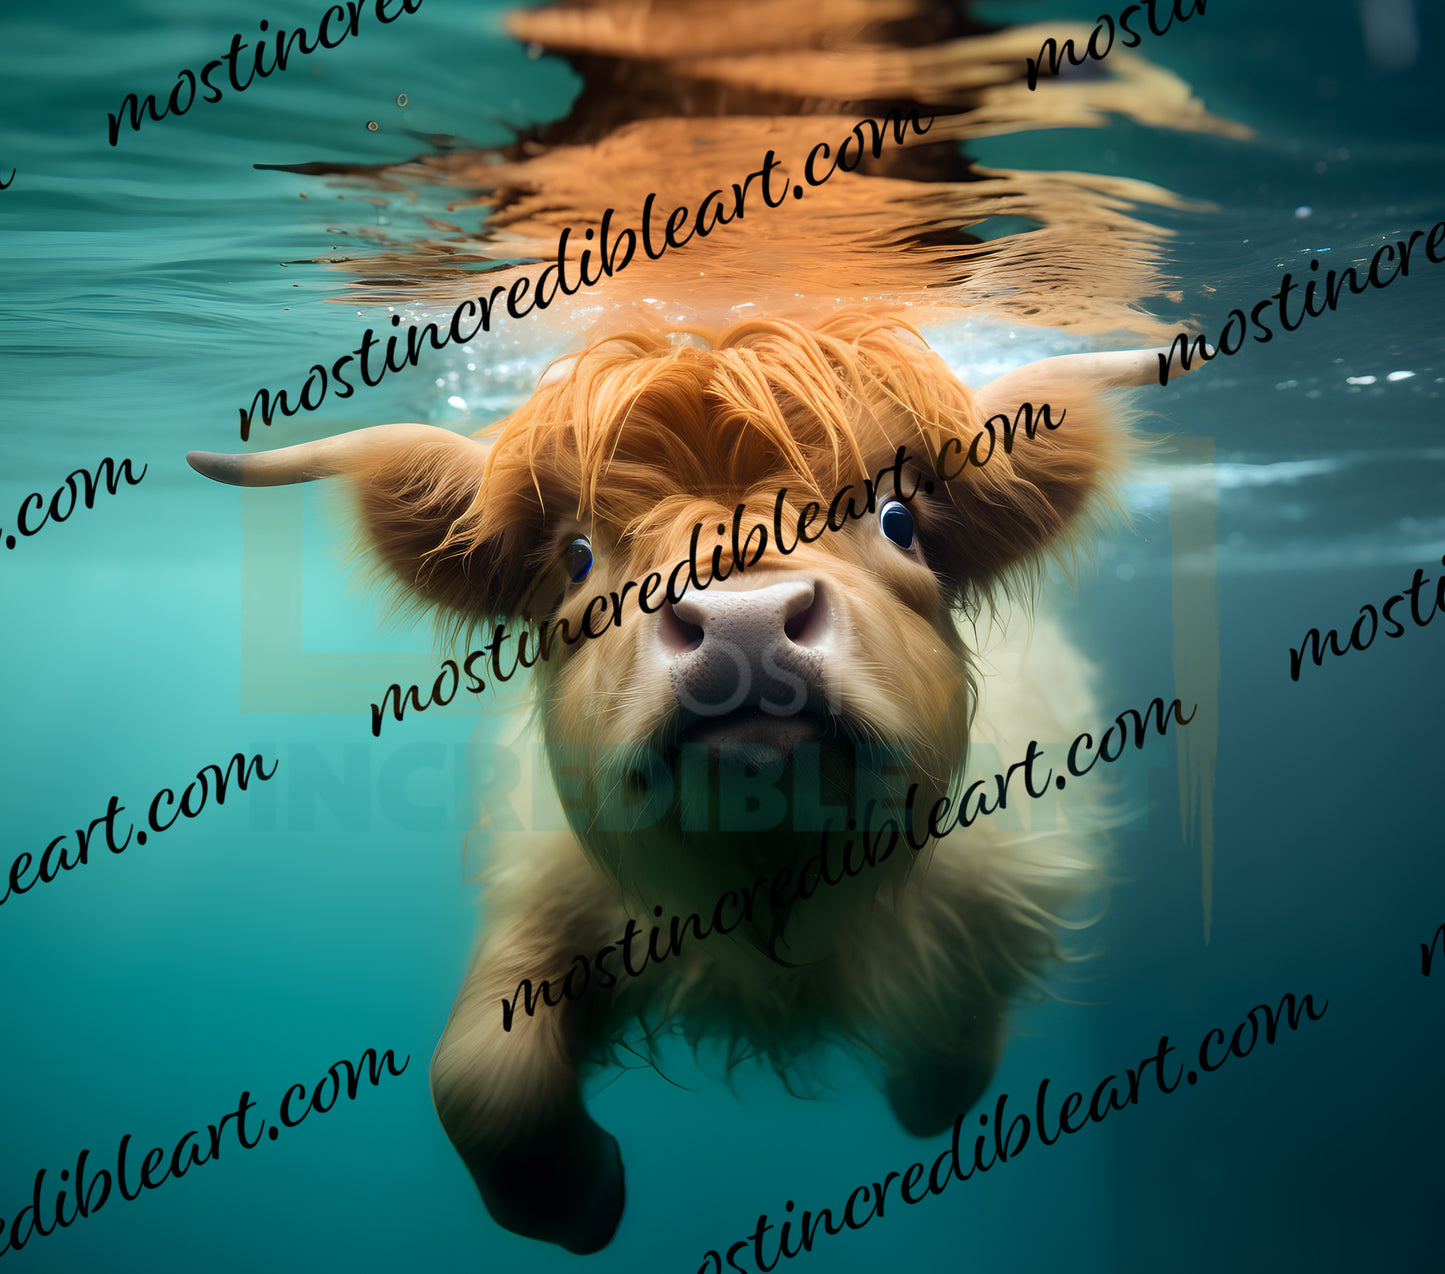 Highland Cows Under Water Action Shots PNGs - 8-20 oz Tumbler Digital Downloads